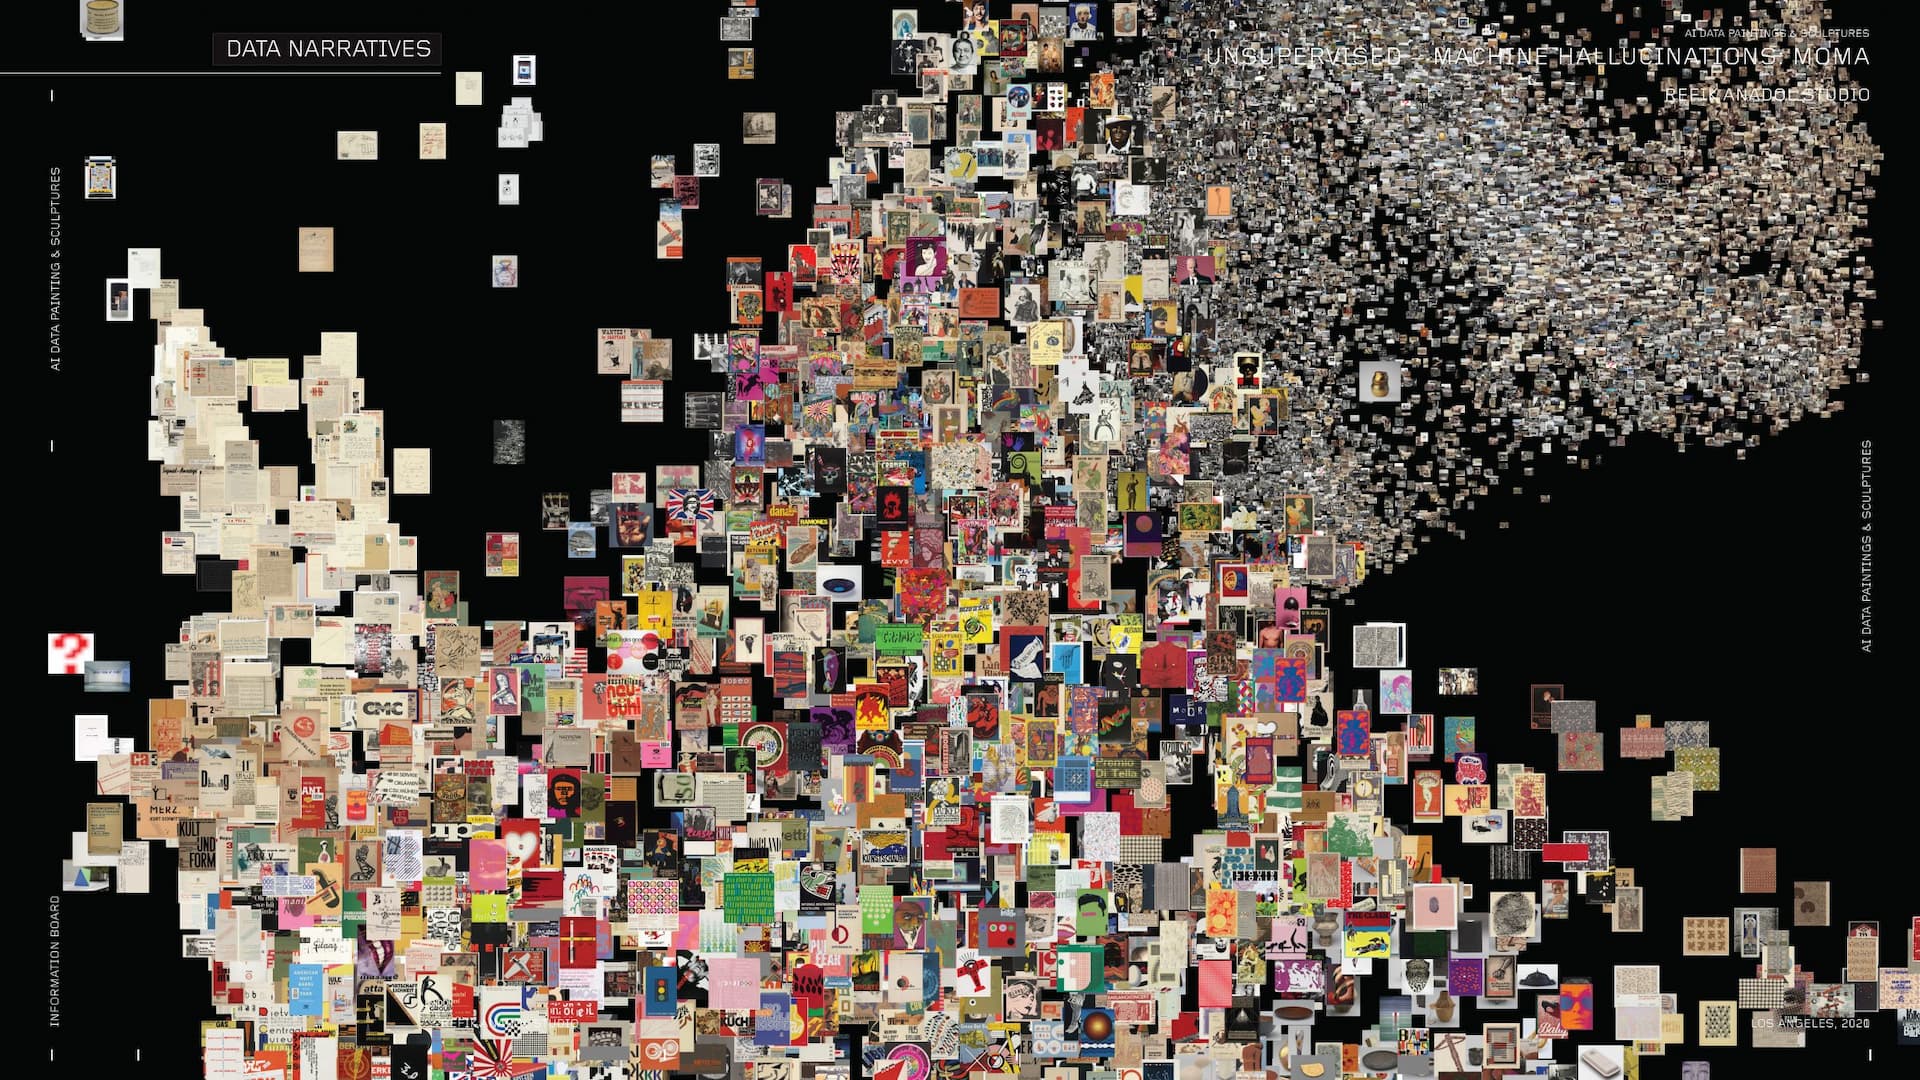 A vast collection of The Museum of Modern Art in the mind of a machine